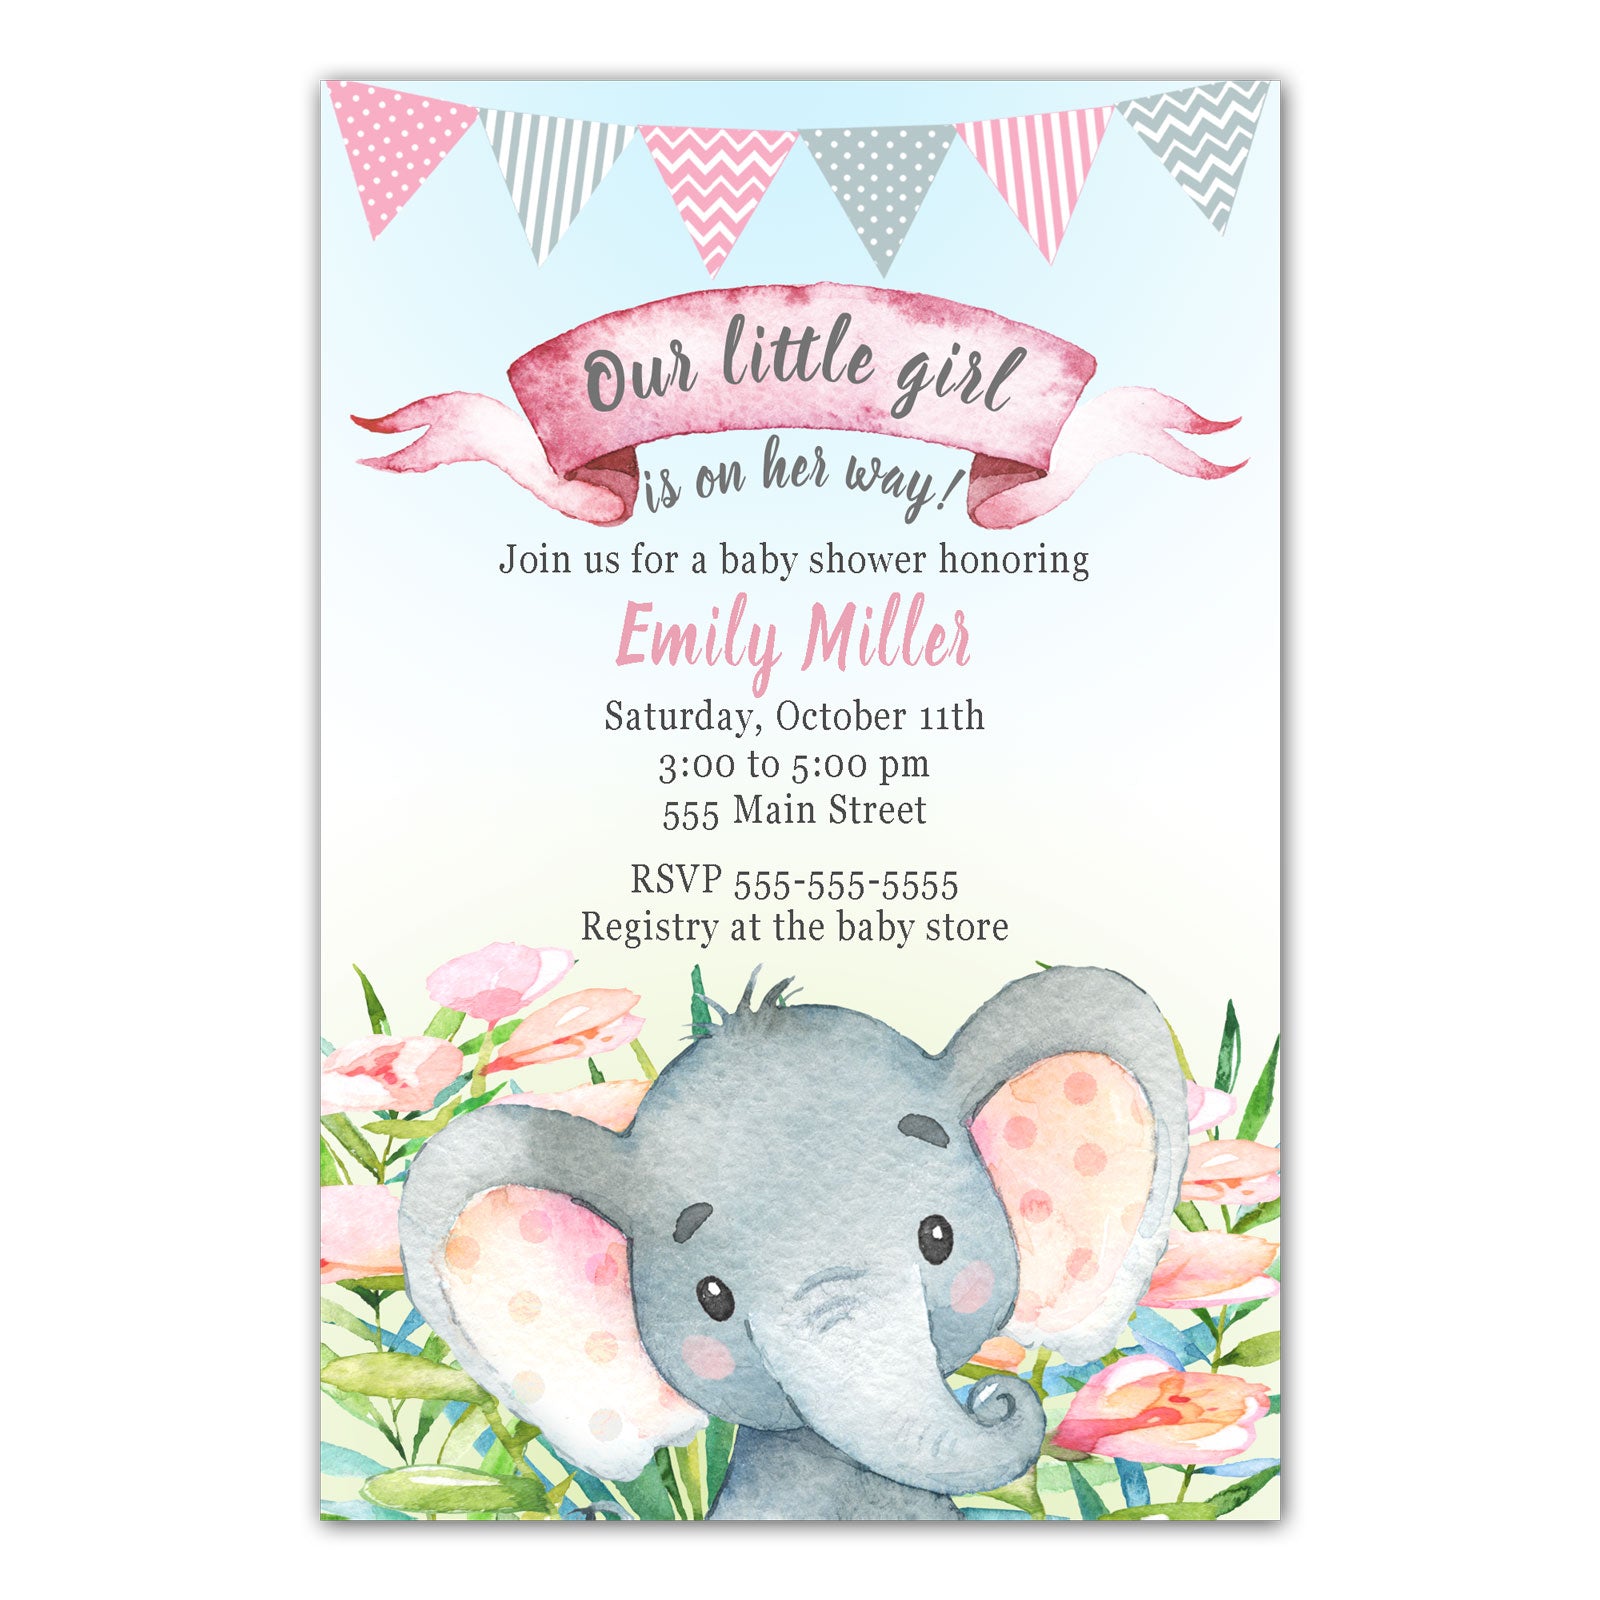 Elephant invitations watercolor painted girl baby shower printable